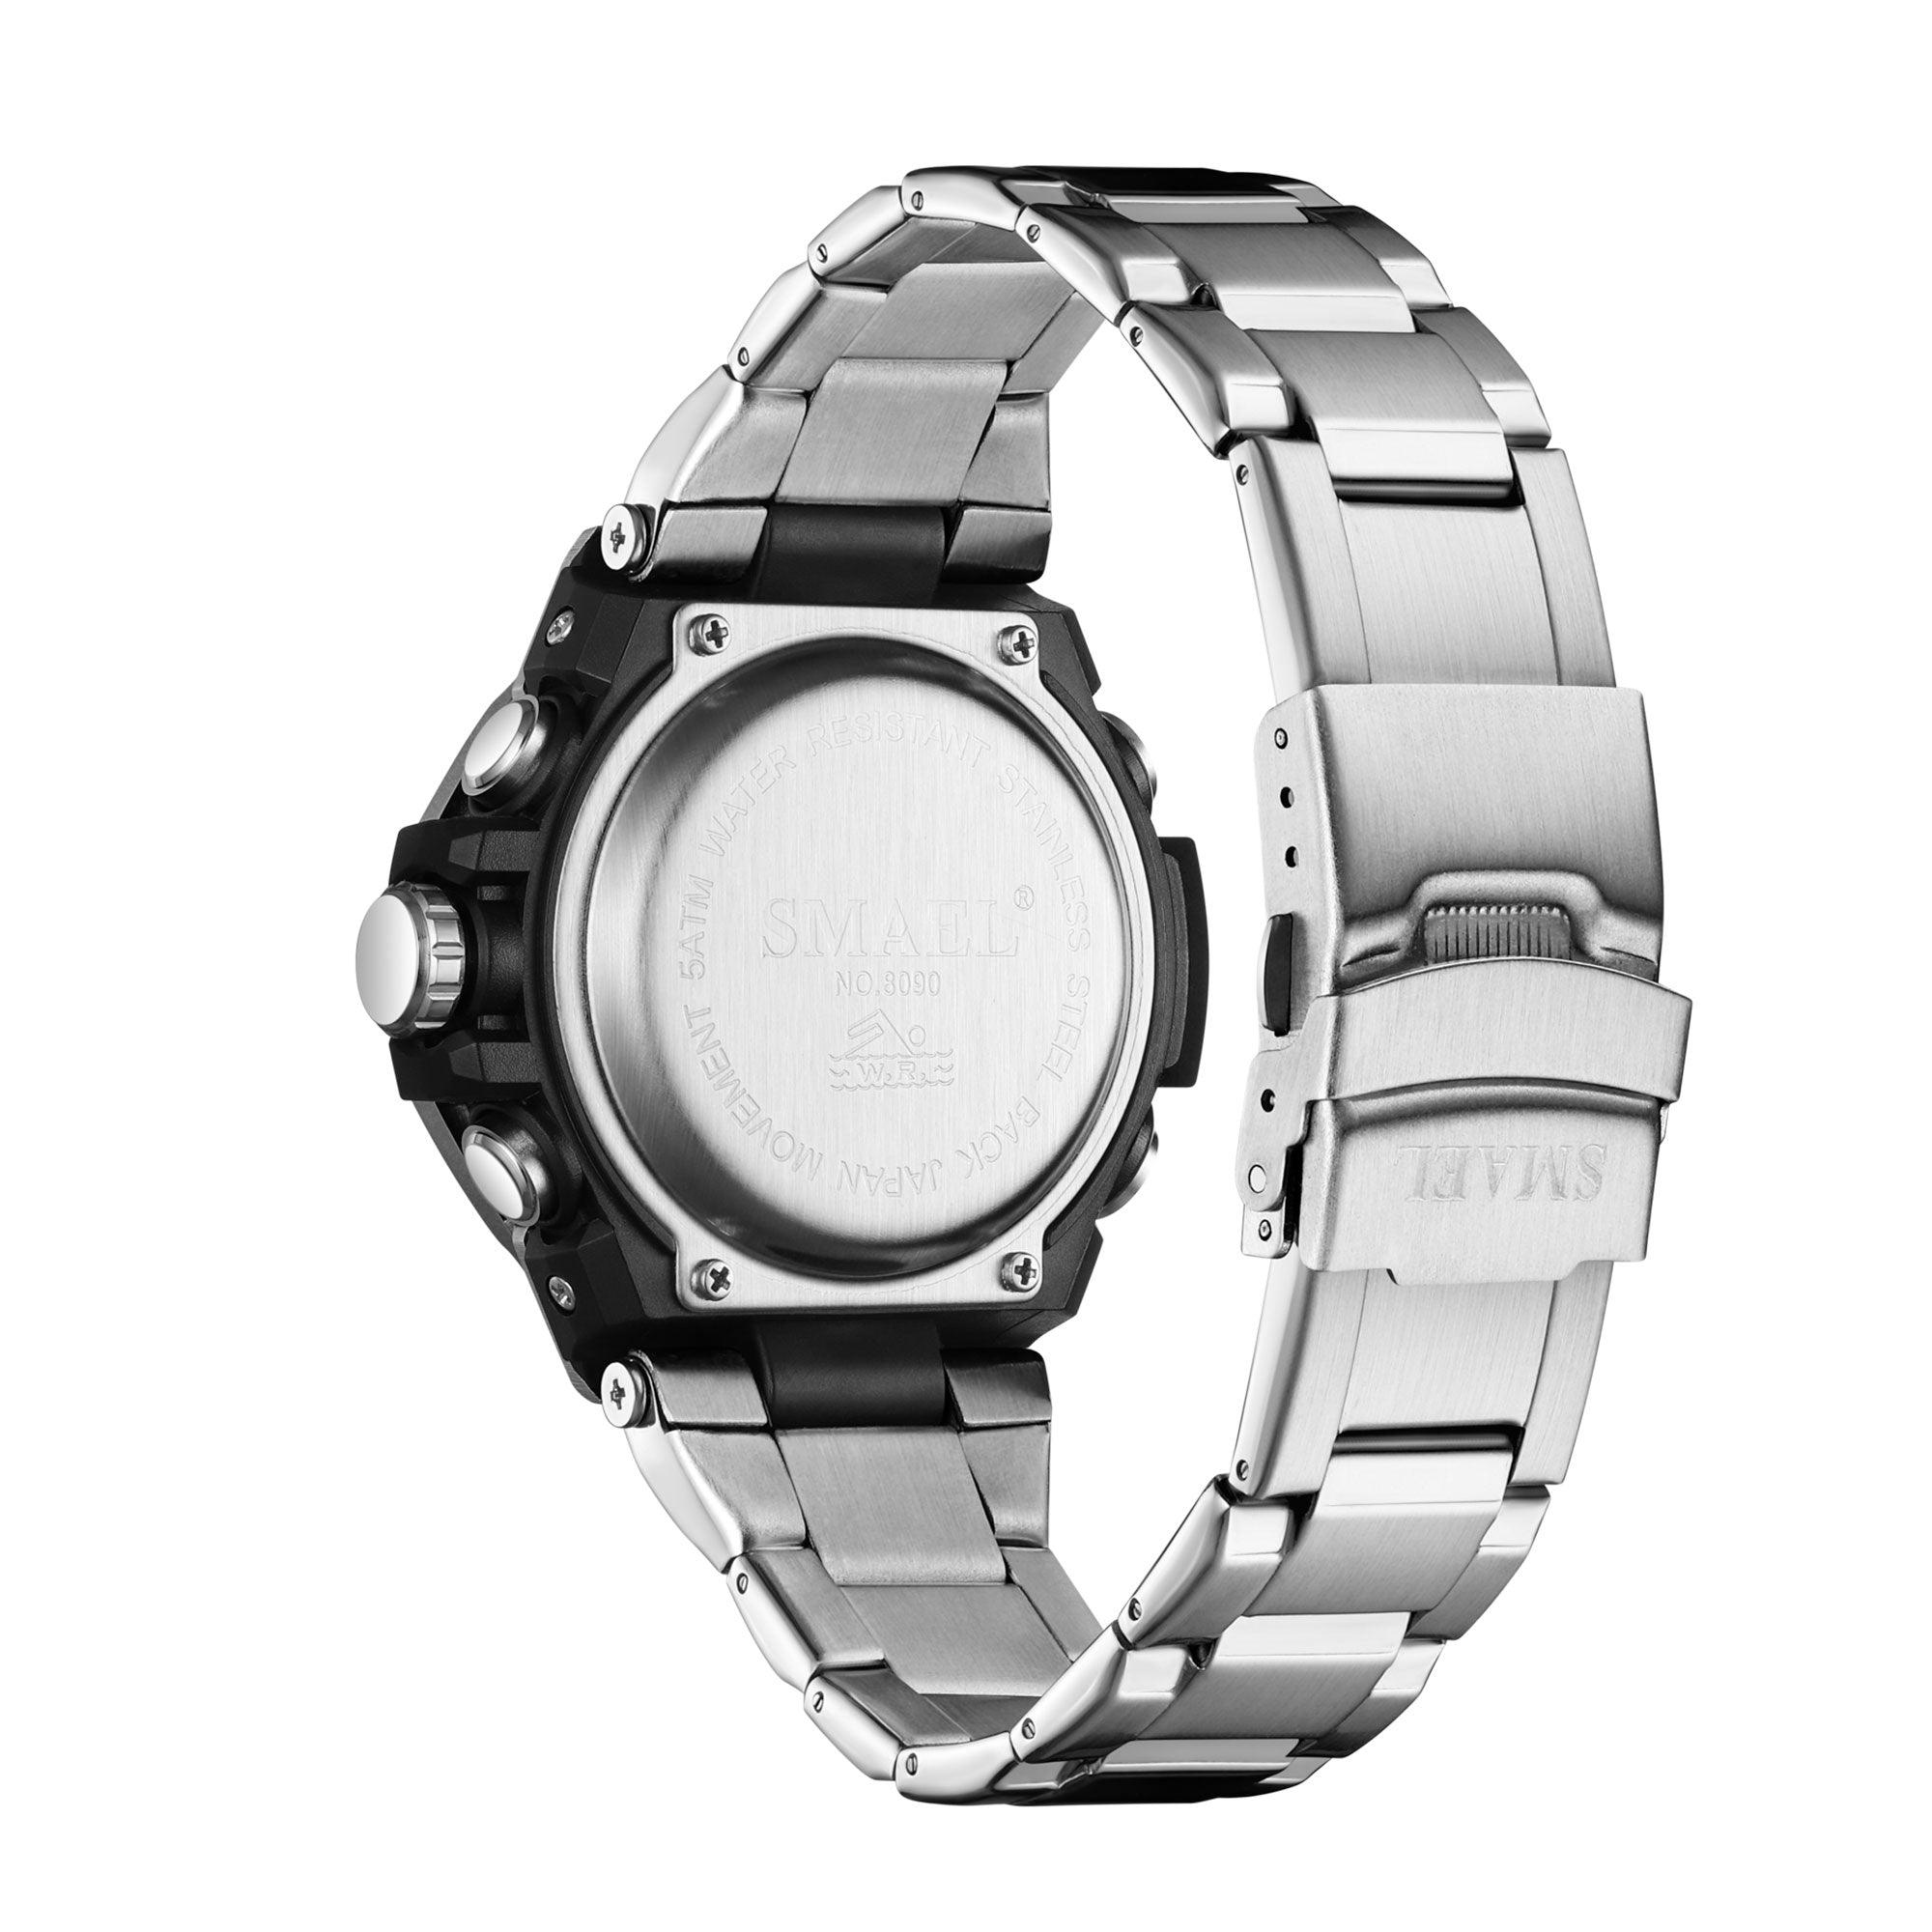 Smael 8090 Stainless Steel Watch - Silver